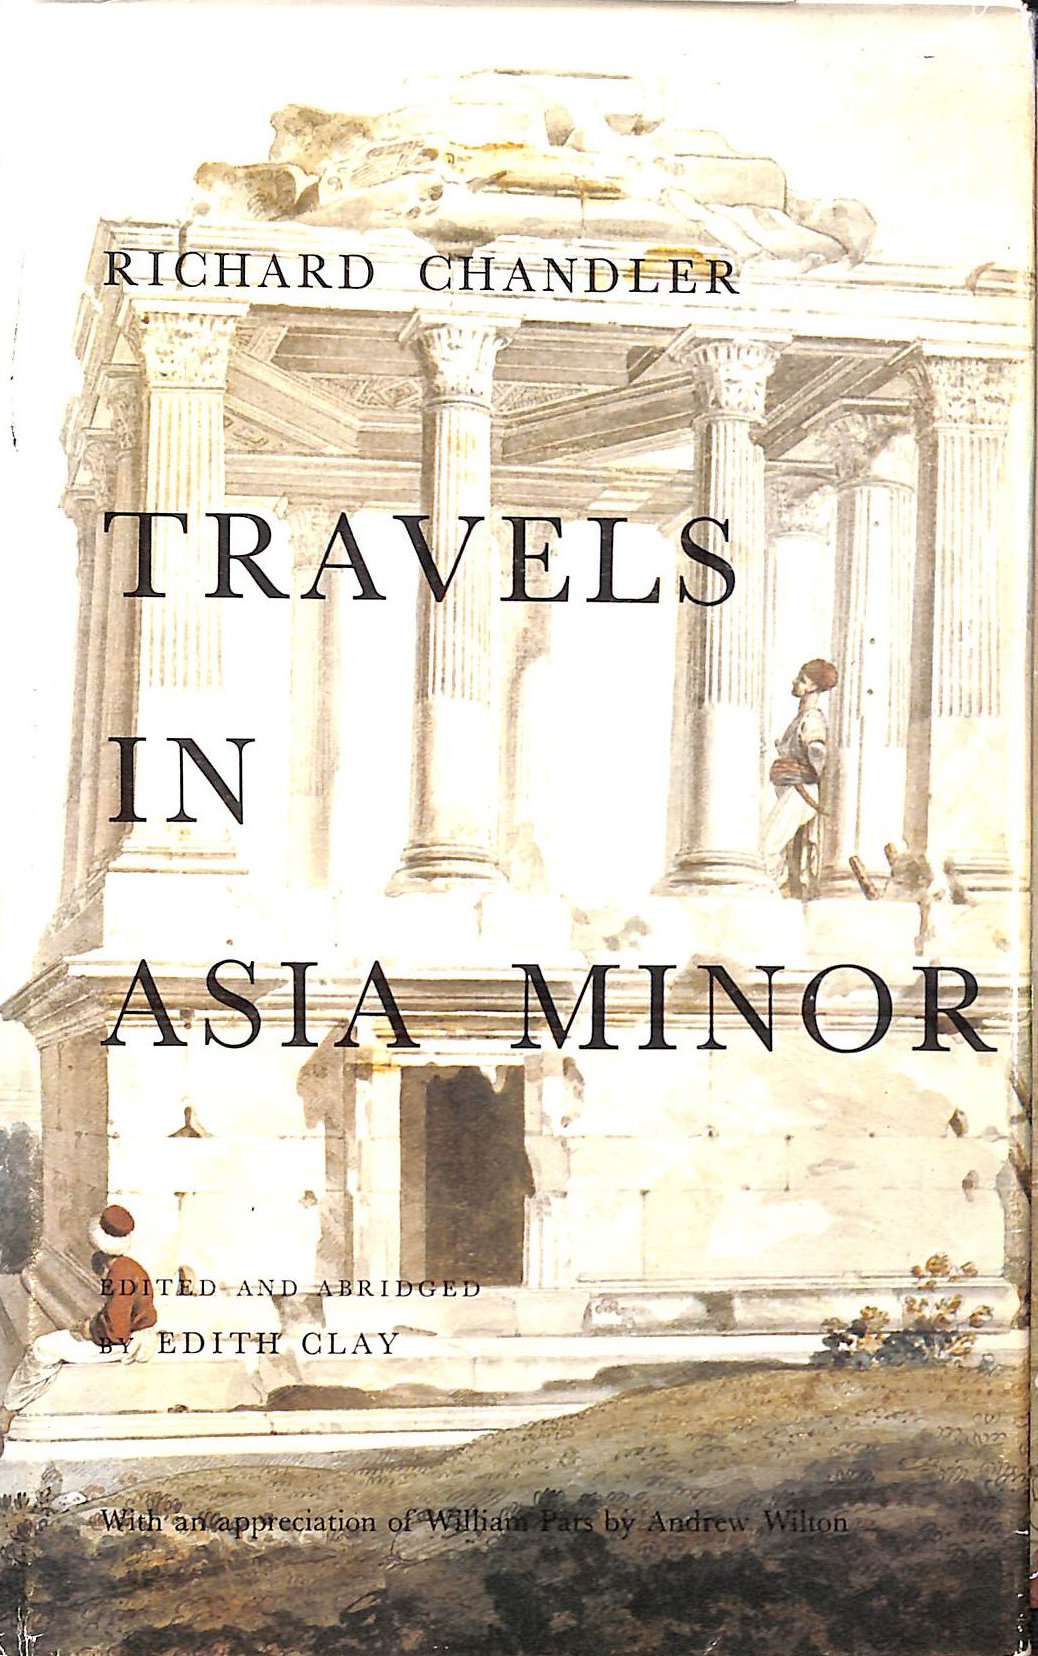 CHANDLER, RICHARD; CLAY, EDITH [EDITOR] - Travels in Asia Minor: 1764-1765